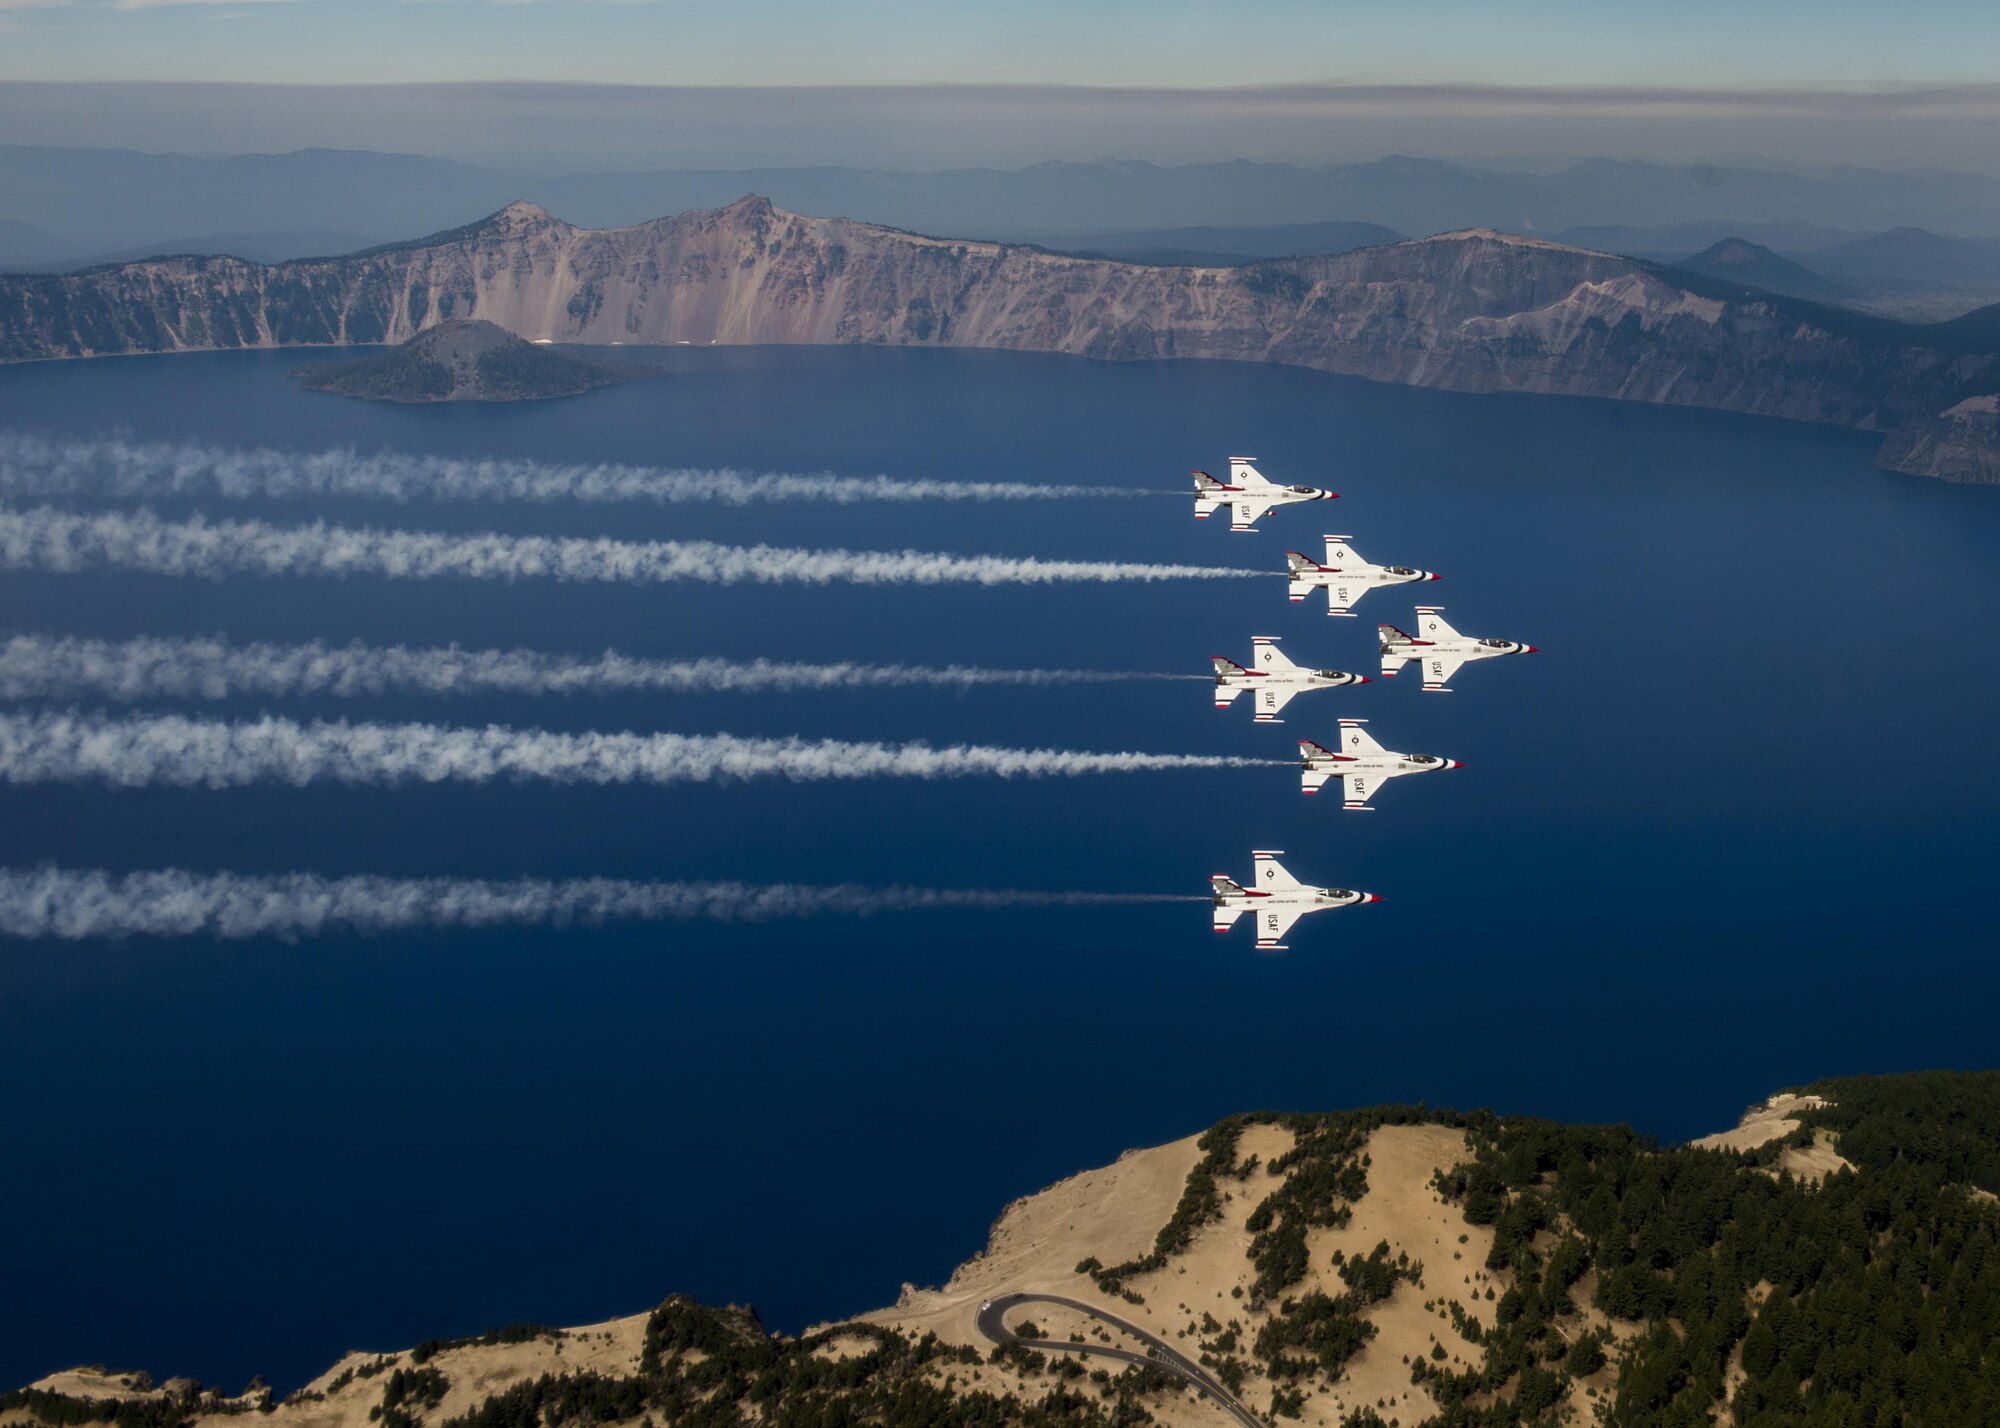 The Thunderbirds fly over Crater Lake, Oregon, during their return to Nellis Air Force Base, Nev., Aug. 29, 2016. The Thunderbirds performed at the Airshow and Warrior Expo at Joint Base Lewis-McChord, Wash., Aug. 27-28. (U.S. Air Force photo/Tech. Sgt. Christopher Boitz)